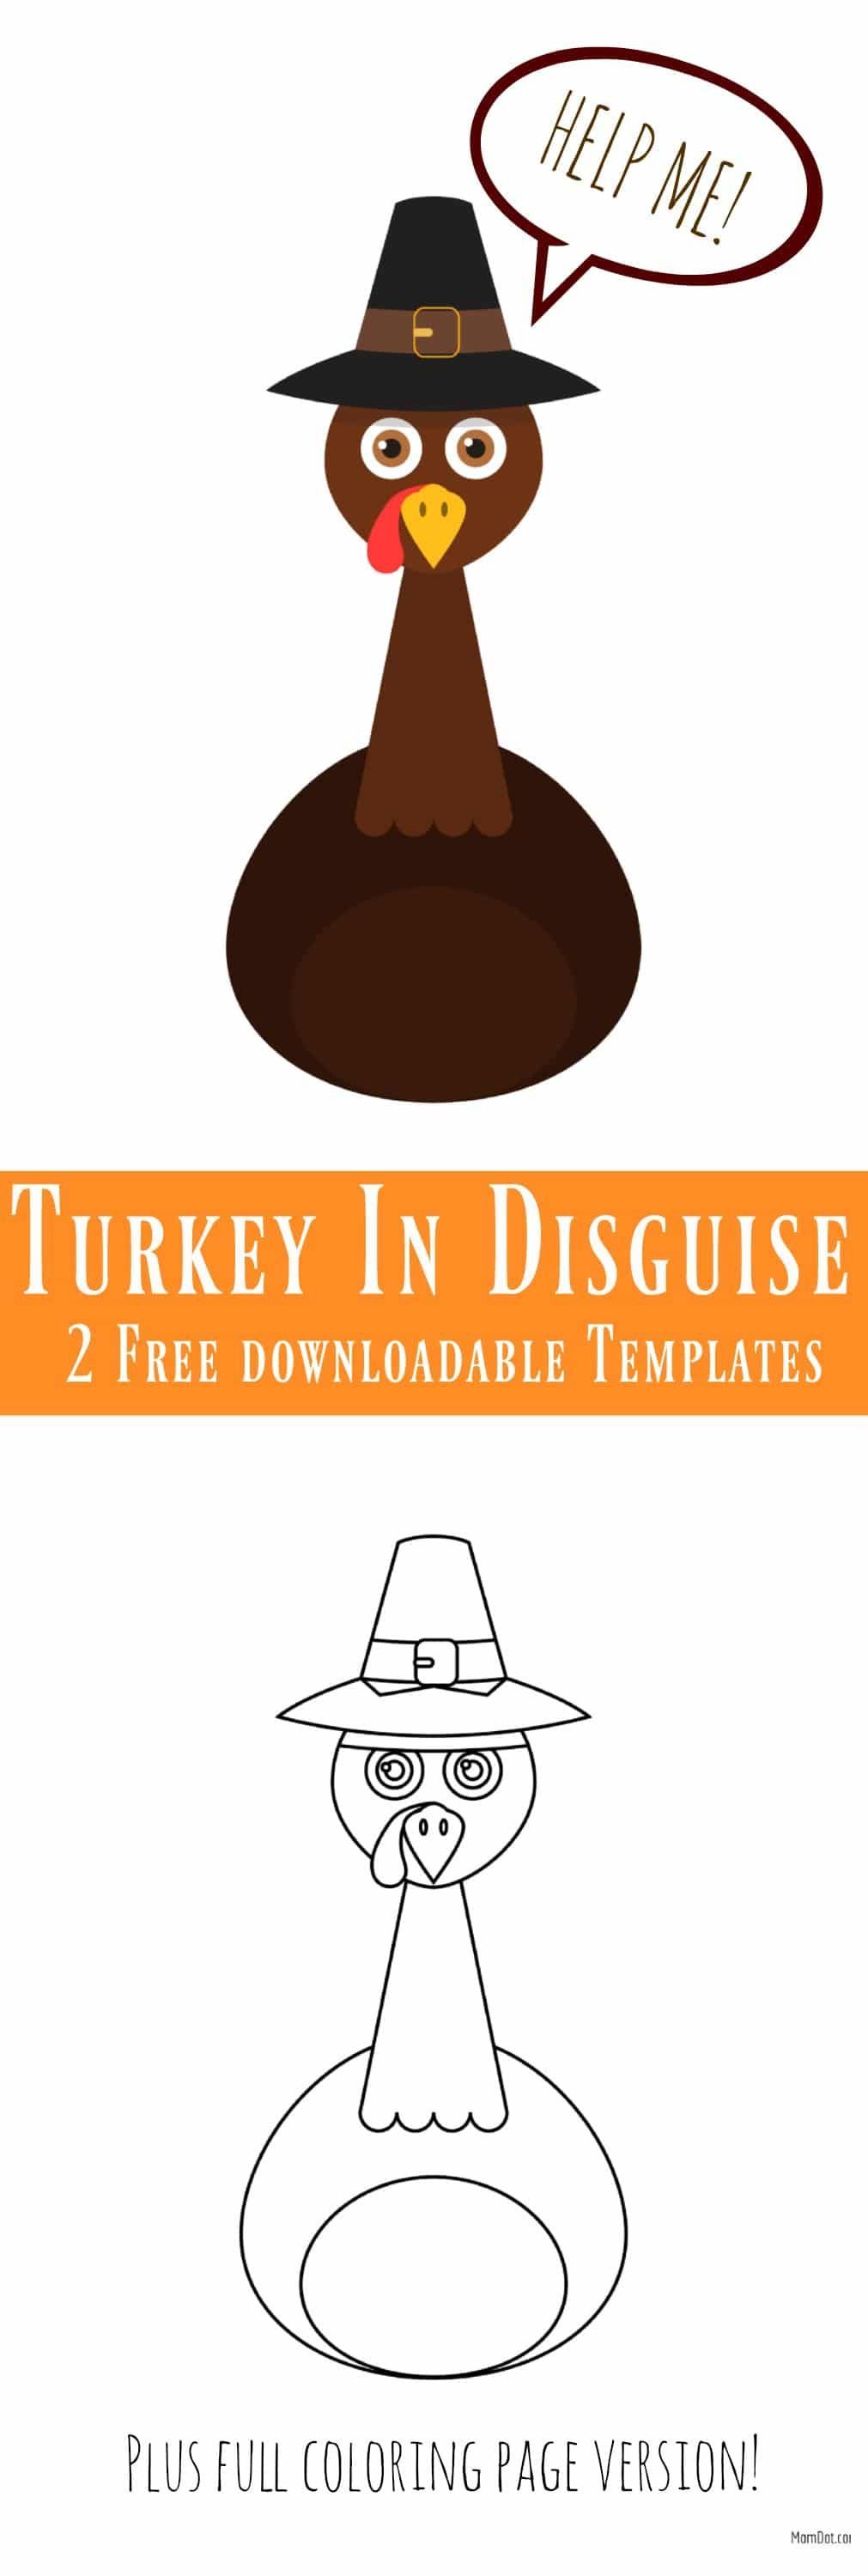 Turkey in Disguise Free Printable Template - Turkey in Disguise Free Printable Template -   18 disguise a turkey project printable template ideas